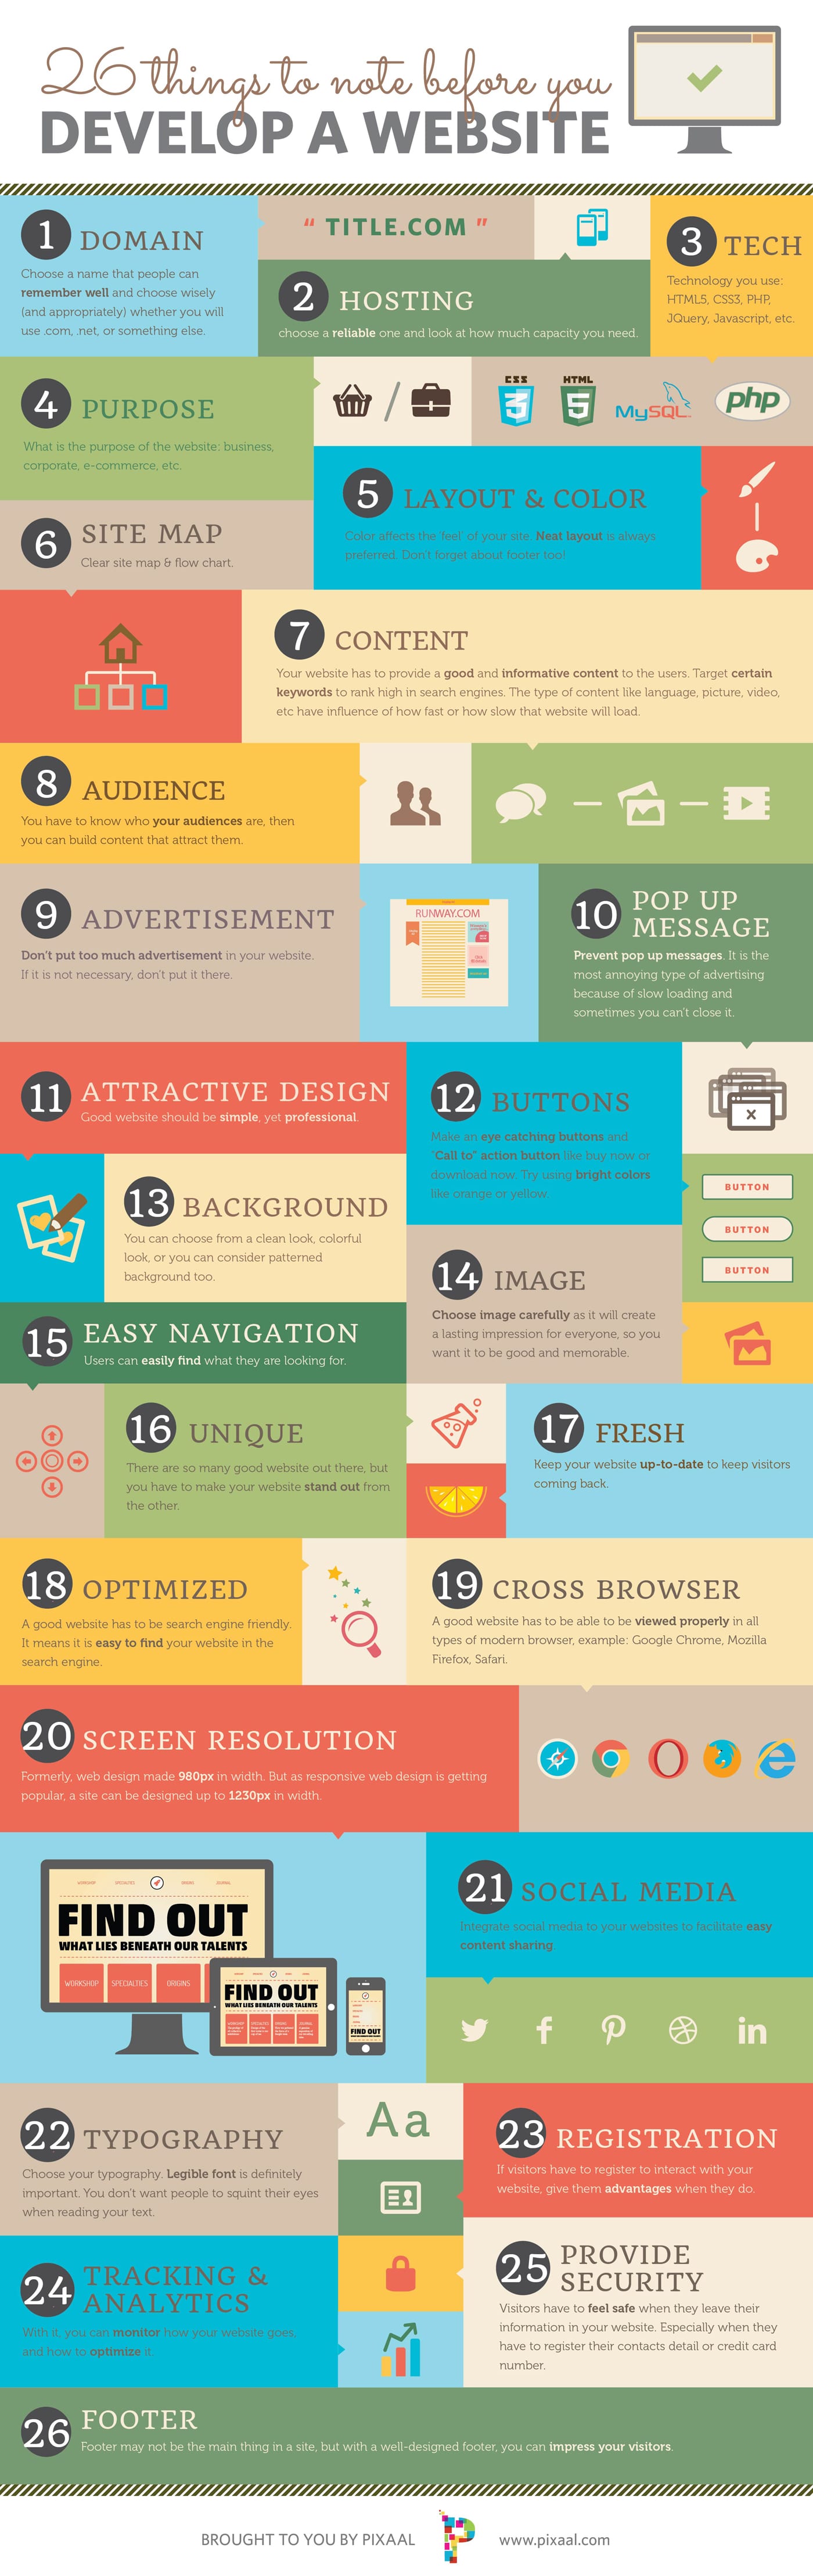 26 Things To Consider Before Developing Your Website [Infographic]